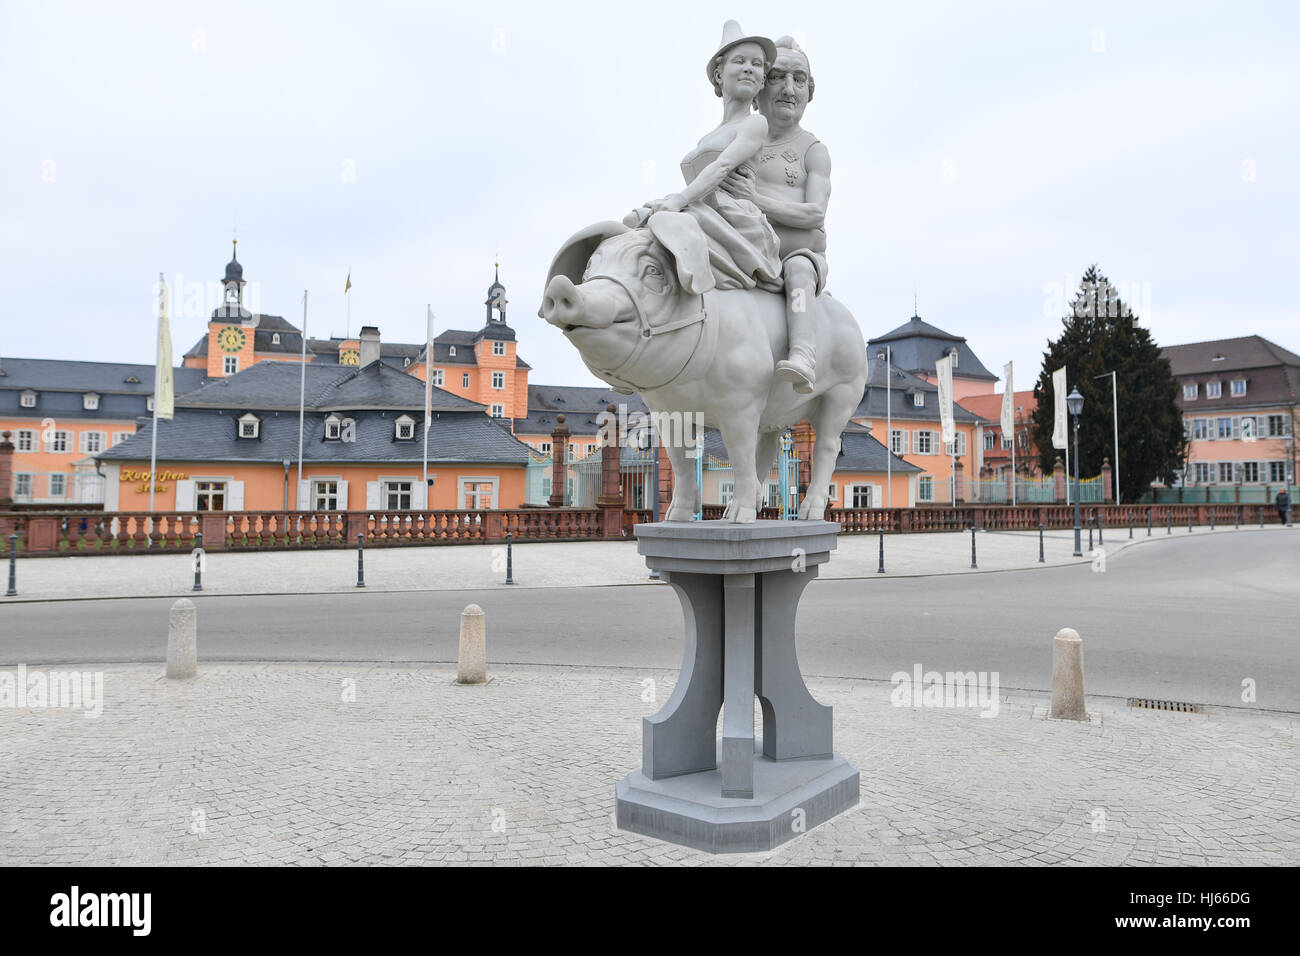 Schwetzingen, Germany. 26th Jan, 2017. The sculpture entitled 'The lucky pig of Schwetzingen' by the artist Peter Lenk that shows Prince Charles Theodore with a mistress outside the entrance to the palace in Schwetzingen, Germany, 26 January 2017. Following a nationwide raid on right-wing extremists, the federal prosecutor's office will decide today whether arrest warrants will be issued. The main suspect is a 66-year-old man from Schwetzingen near Heidelberg. He is close to the 'Reichsbuerger' (Reich citizen) movement. Photo: Uwe Anspach/dpa/Alamy Live News Stock Photo